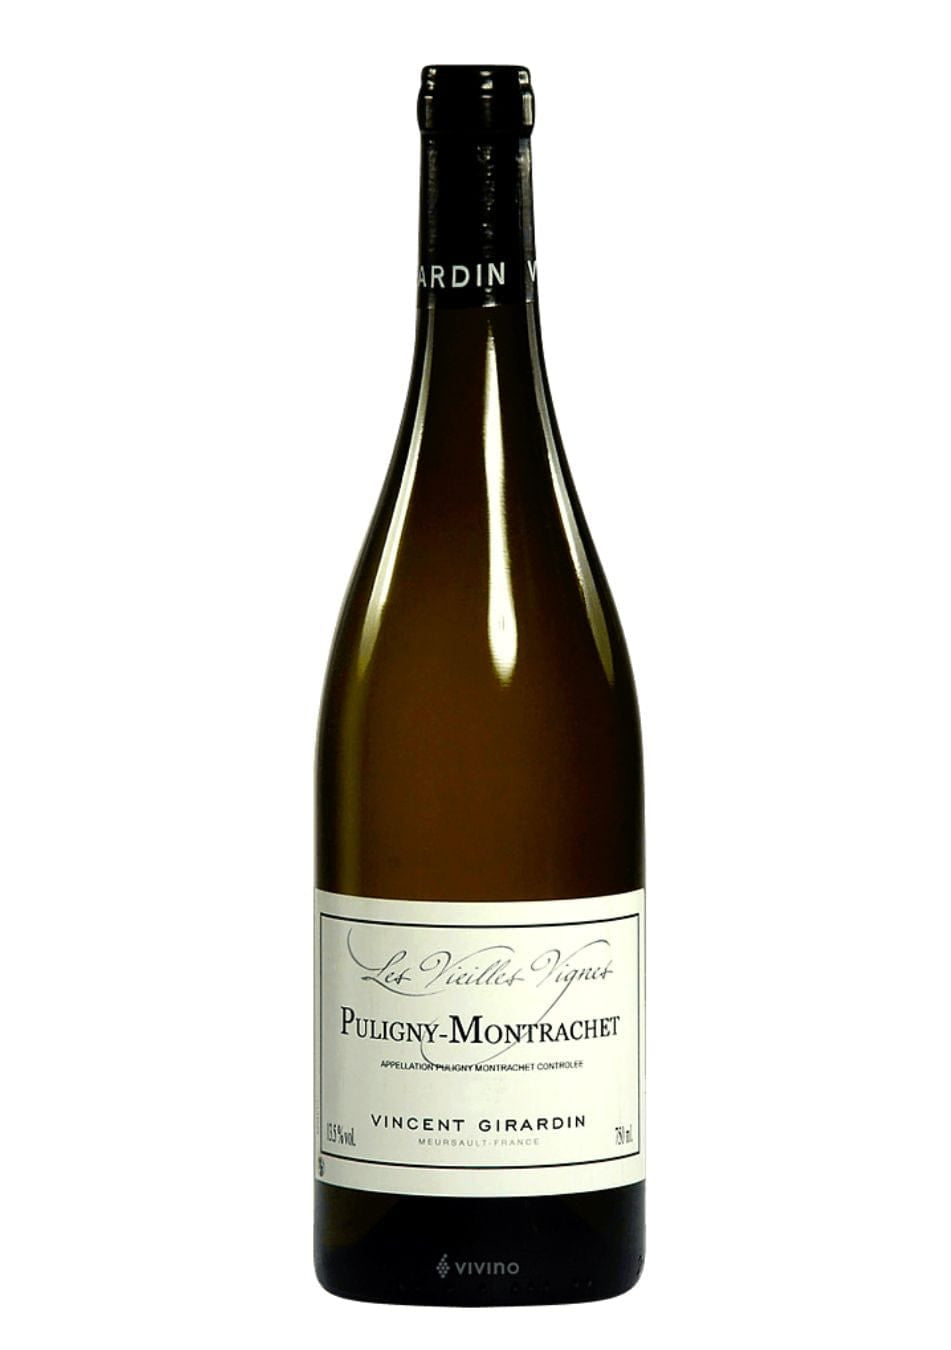 Shop Vincent Girardin Vincent Girardin Puligny-Montrachet Vieilles Vignes 2018 online at PENTICTON artisanal French wine store in Hong Kong. Discover other French wines, promotions, workshops and featured offers at pentictonpacific.com 